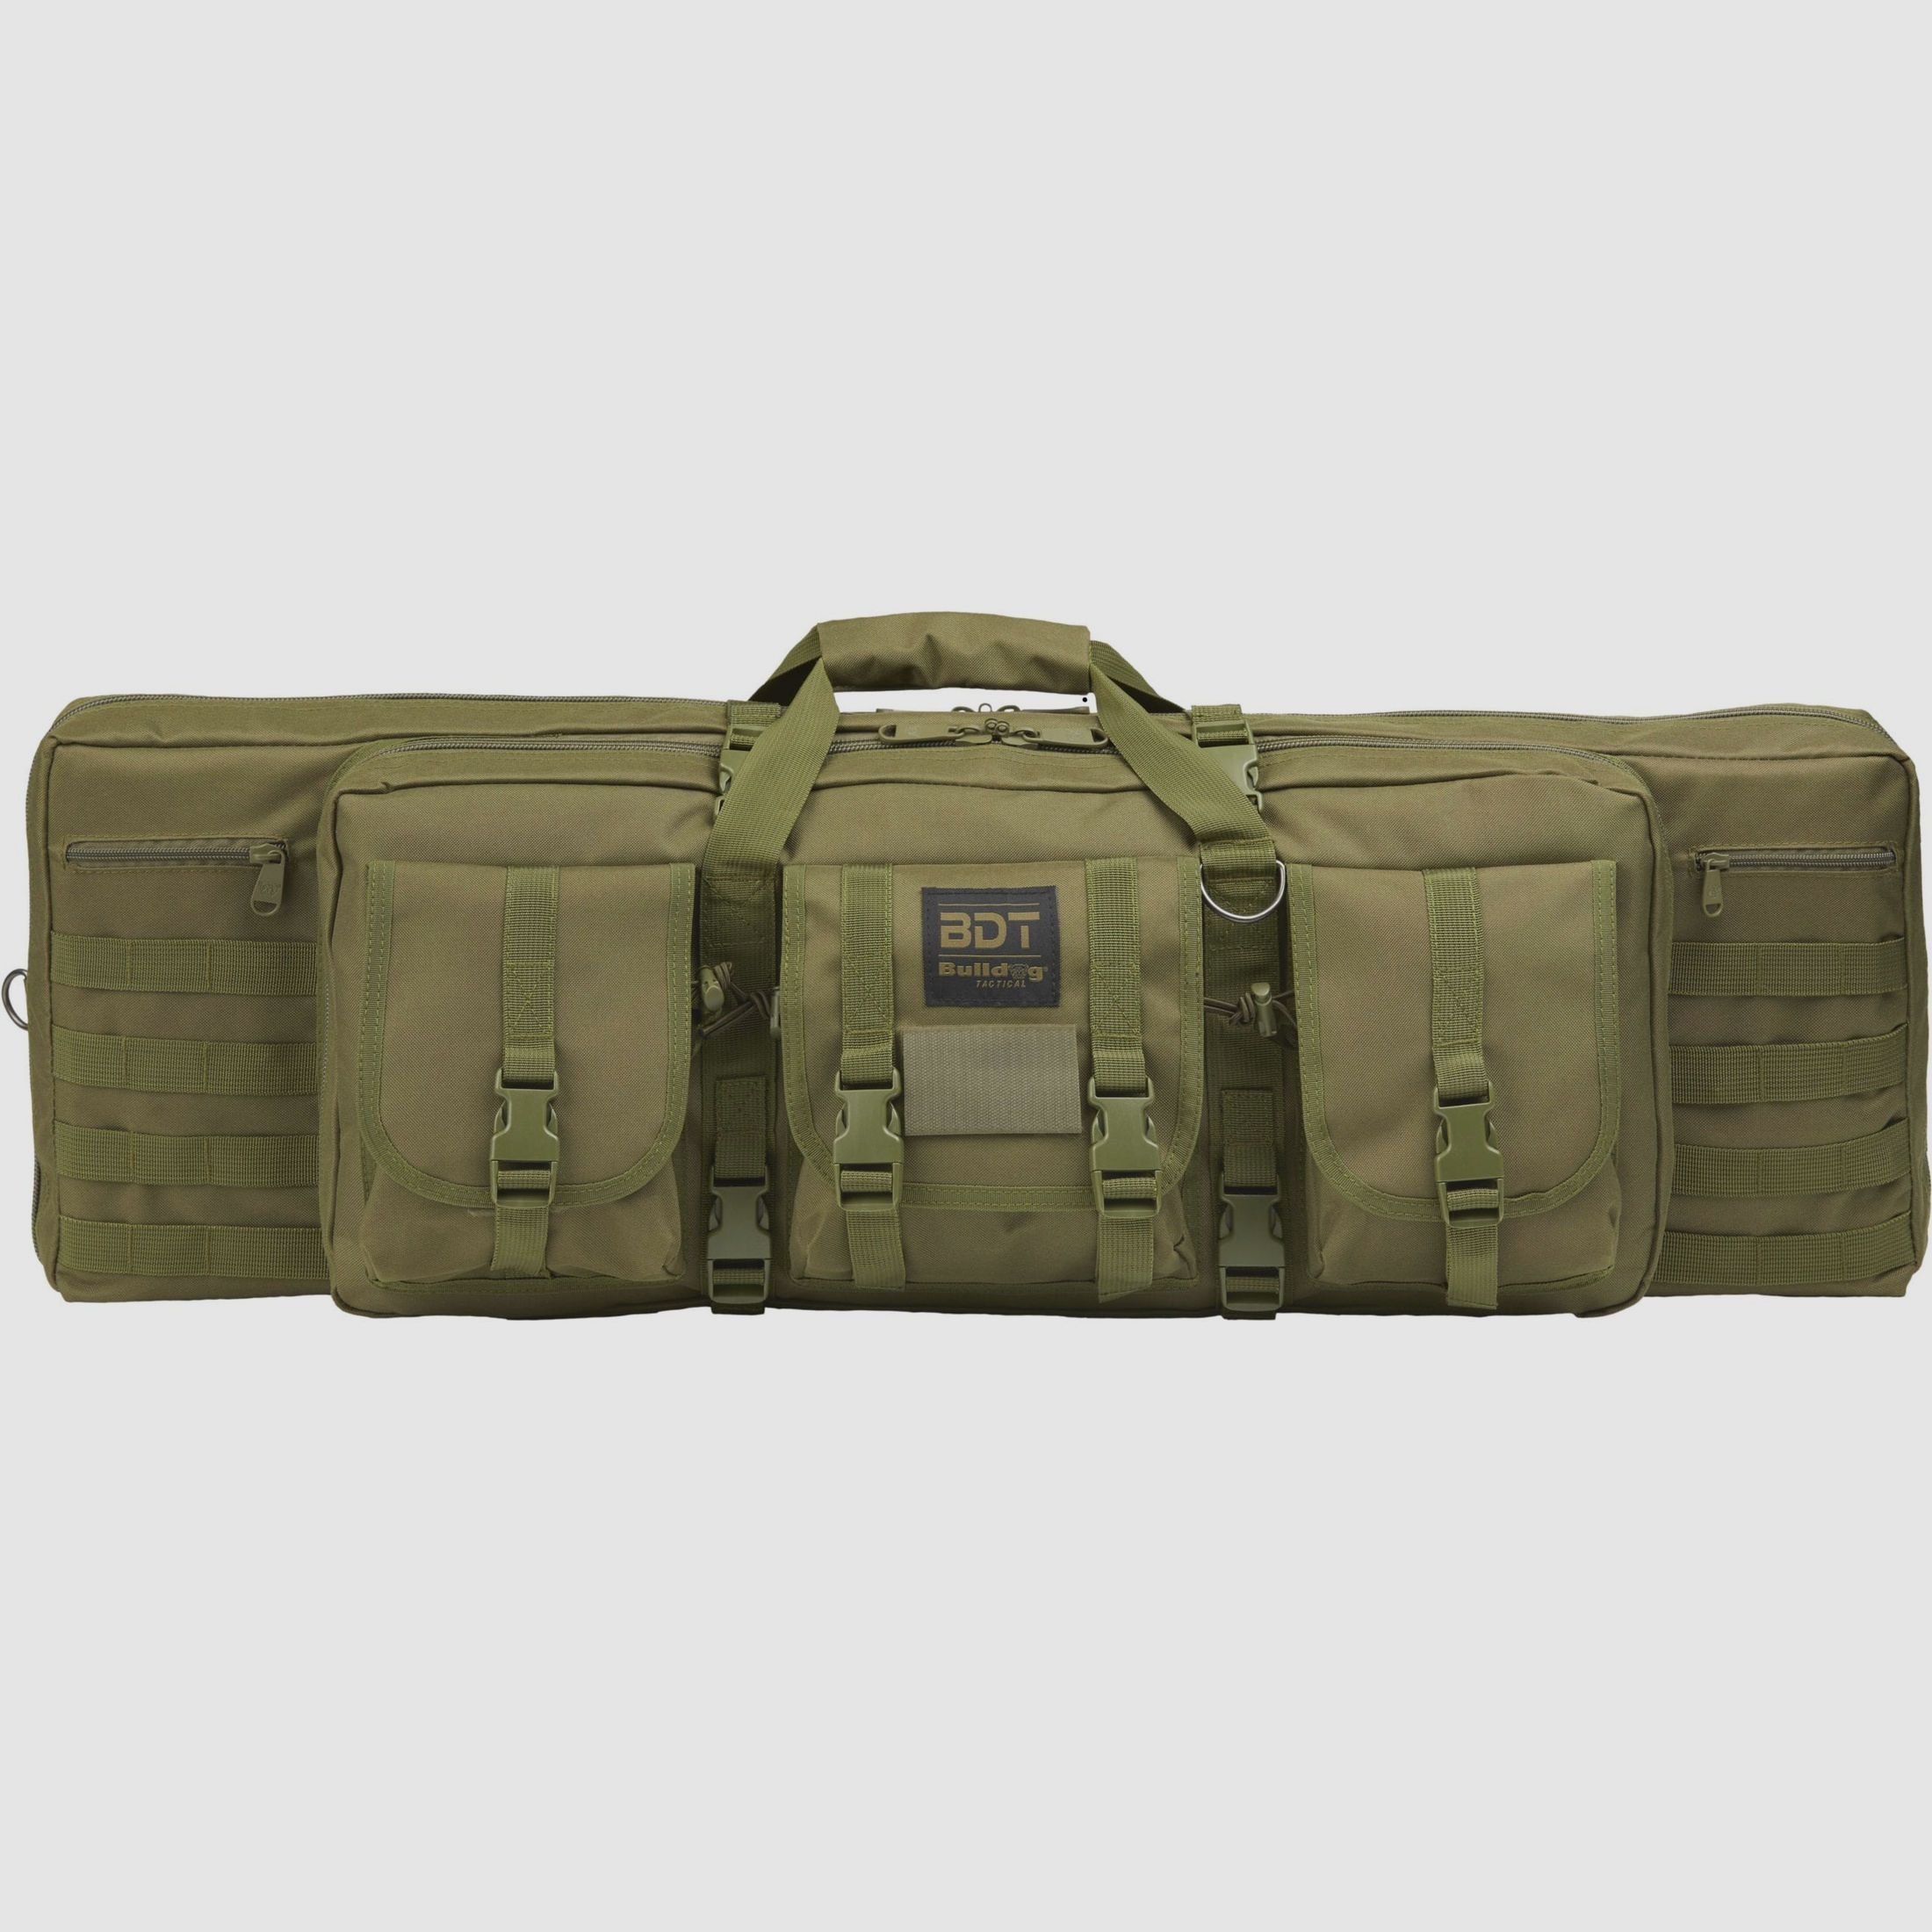 Bulldog Cases BDT TACTICAL- Double - Oliv – Waffentasche (109 cm)